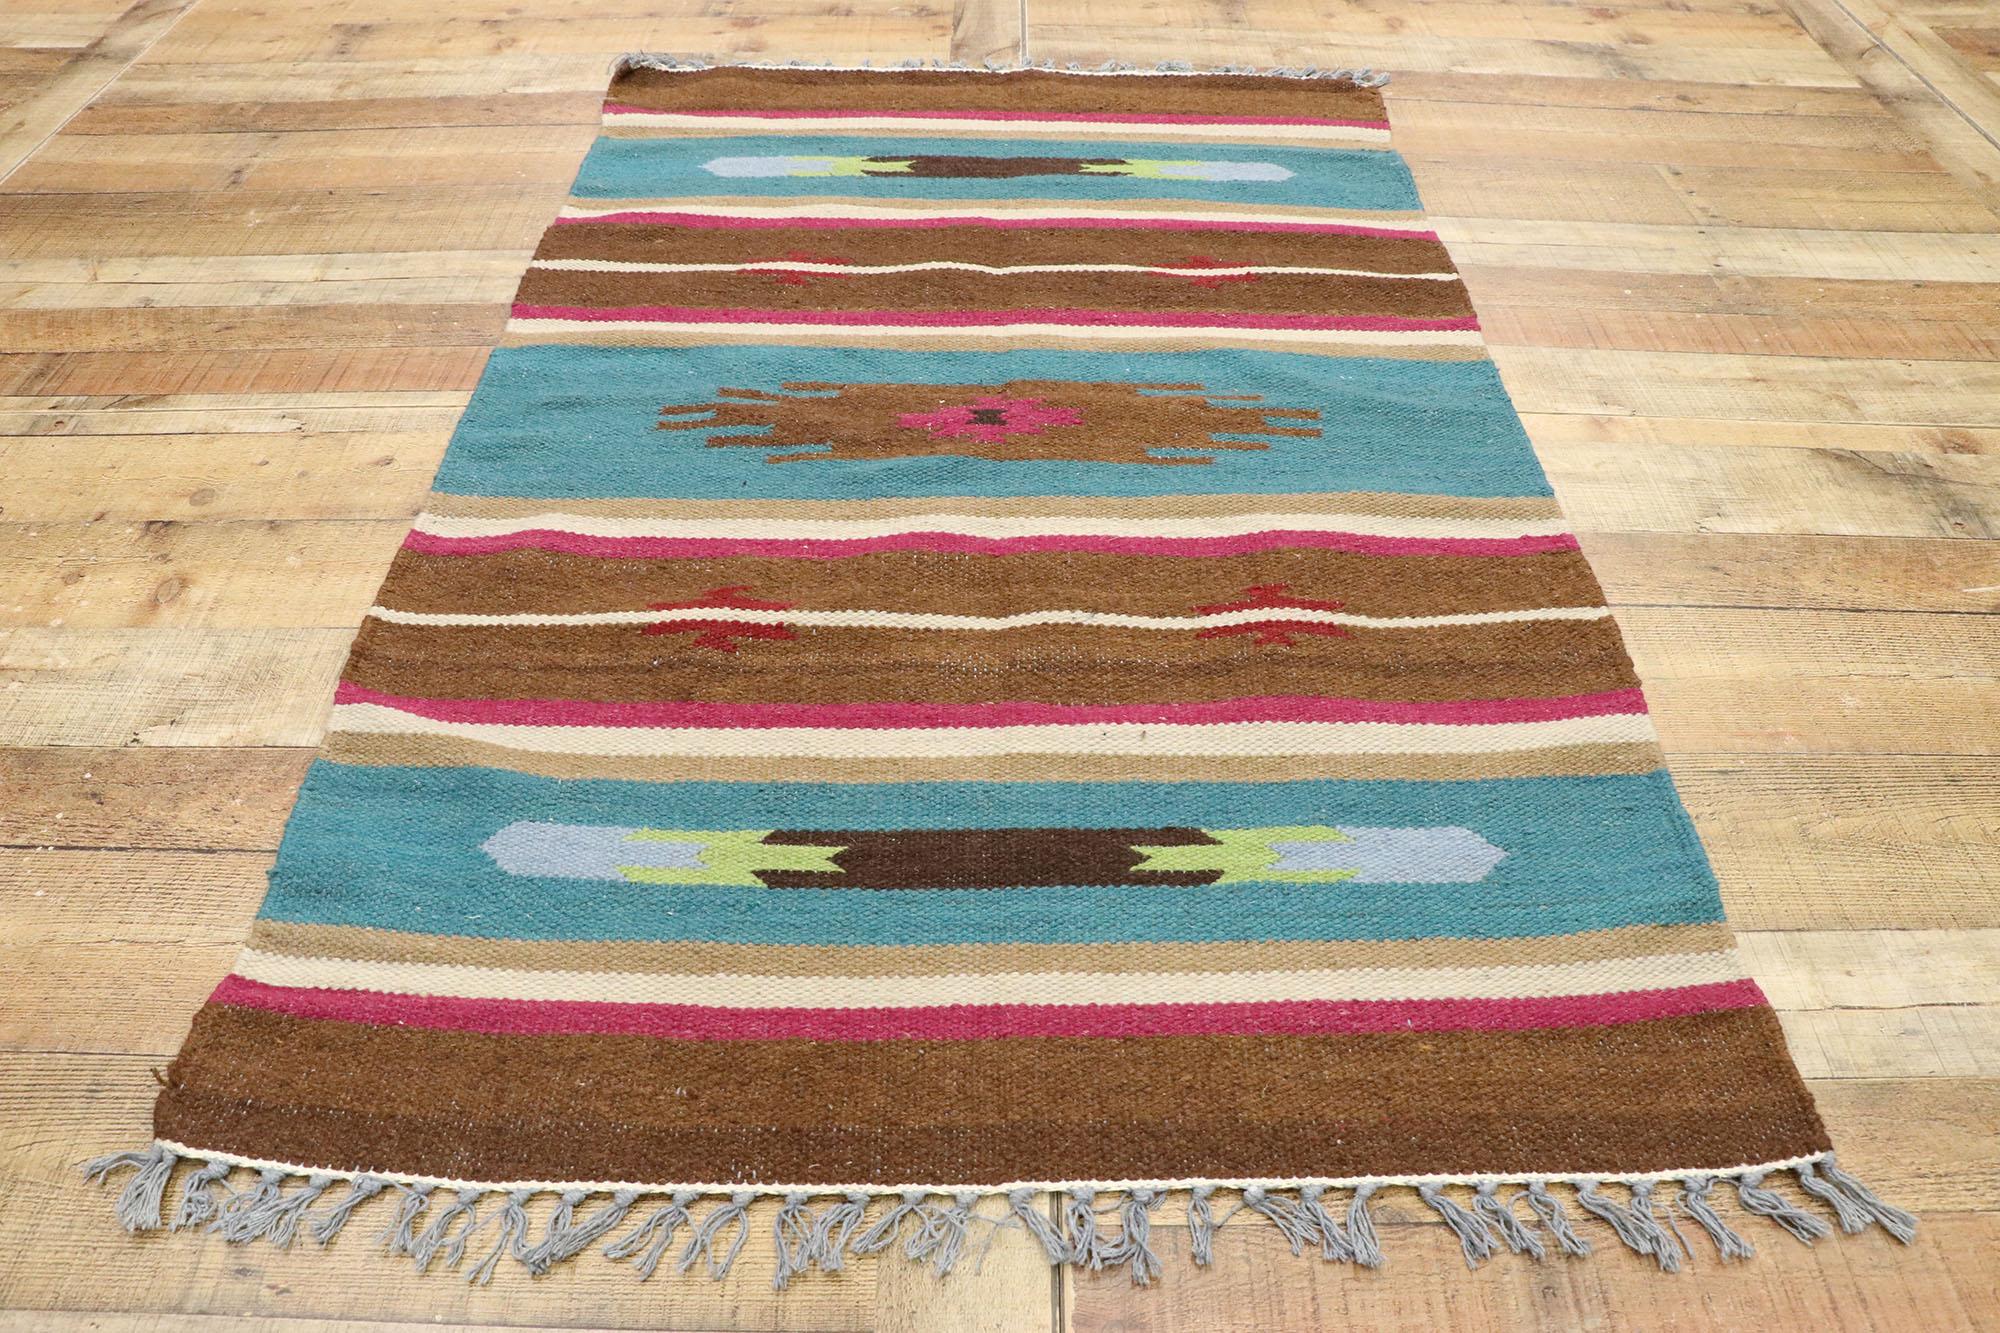 20th Century Vintage American Kilim Rug with Modern Mexican Style